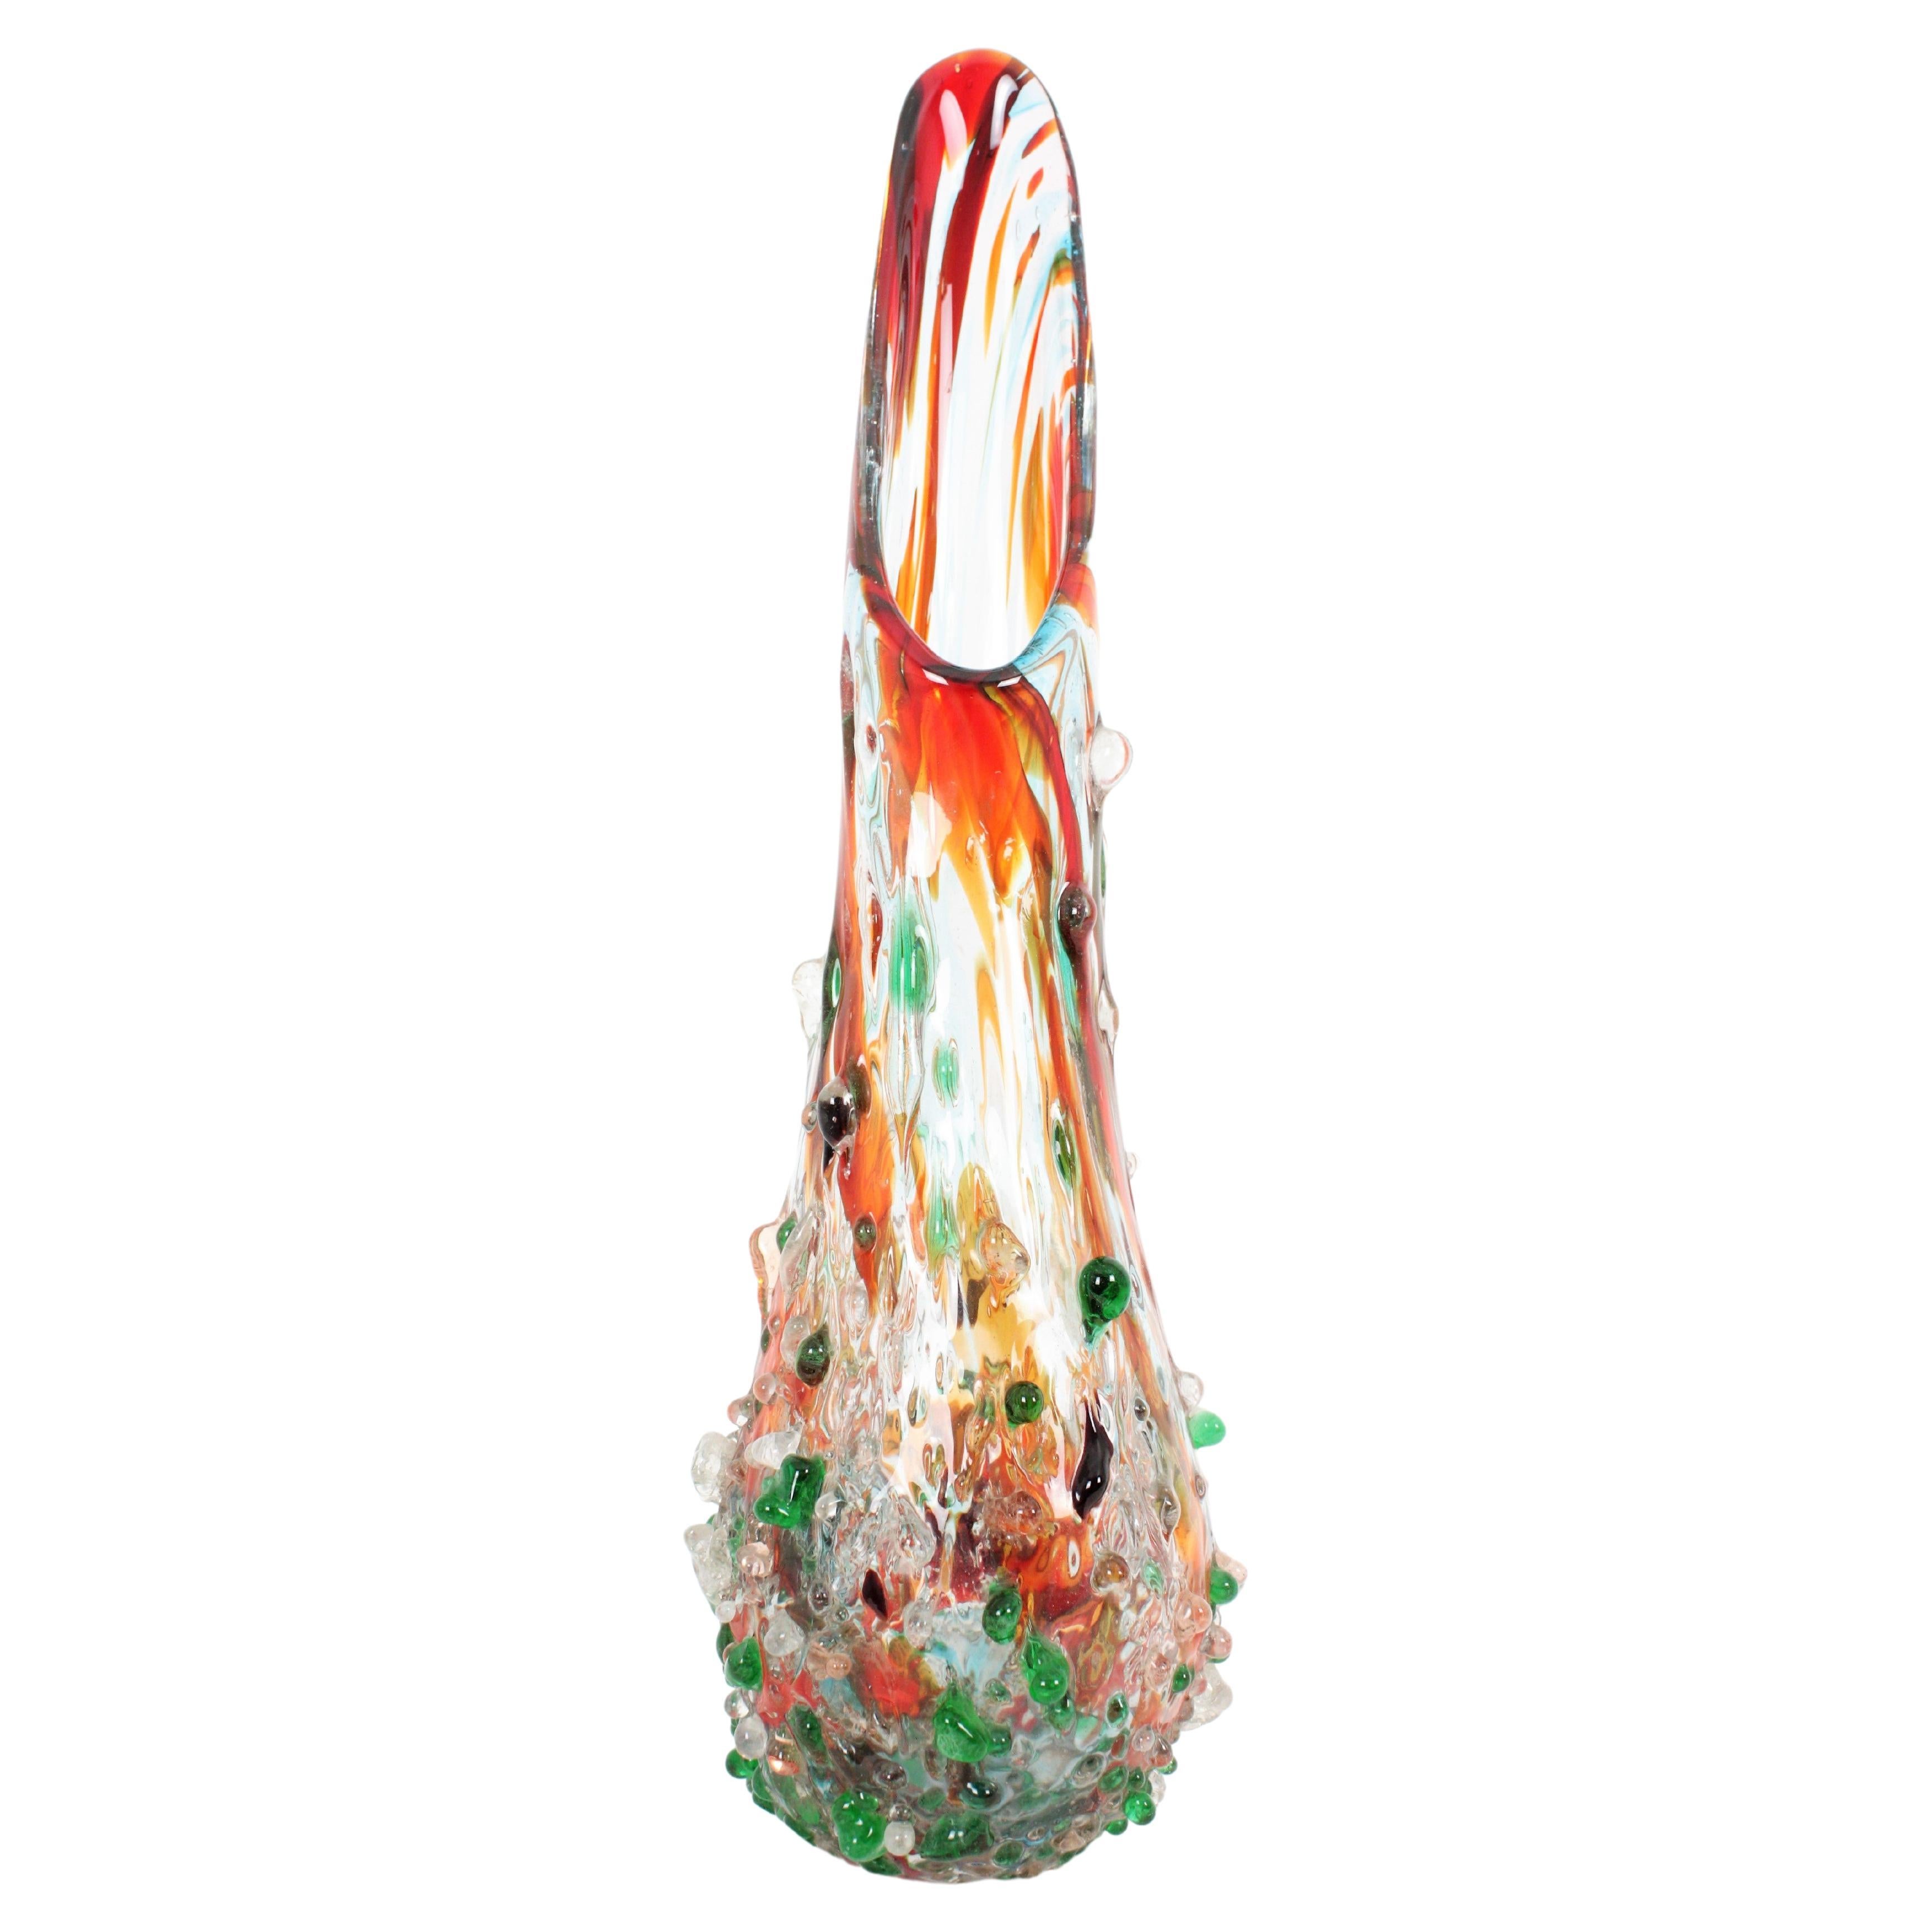 Sculptural hand-blown Italian art Murano multicolor glass vase with applied colorful big glass drops in the style of Cenedese. Italy, 1970s.
Large size
This exquisite large vase, with murrine inclusions and applied glass drops in red, orange, green,